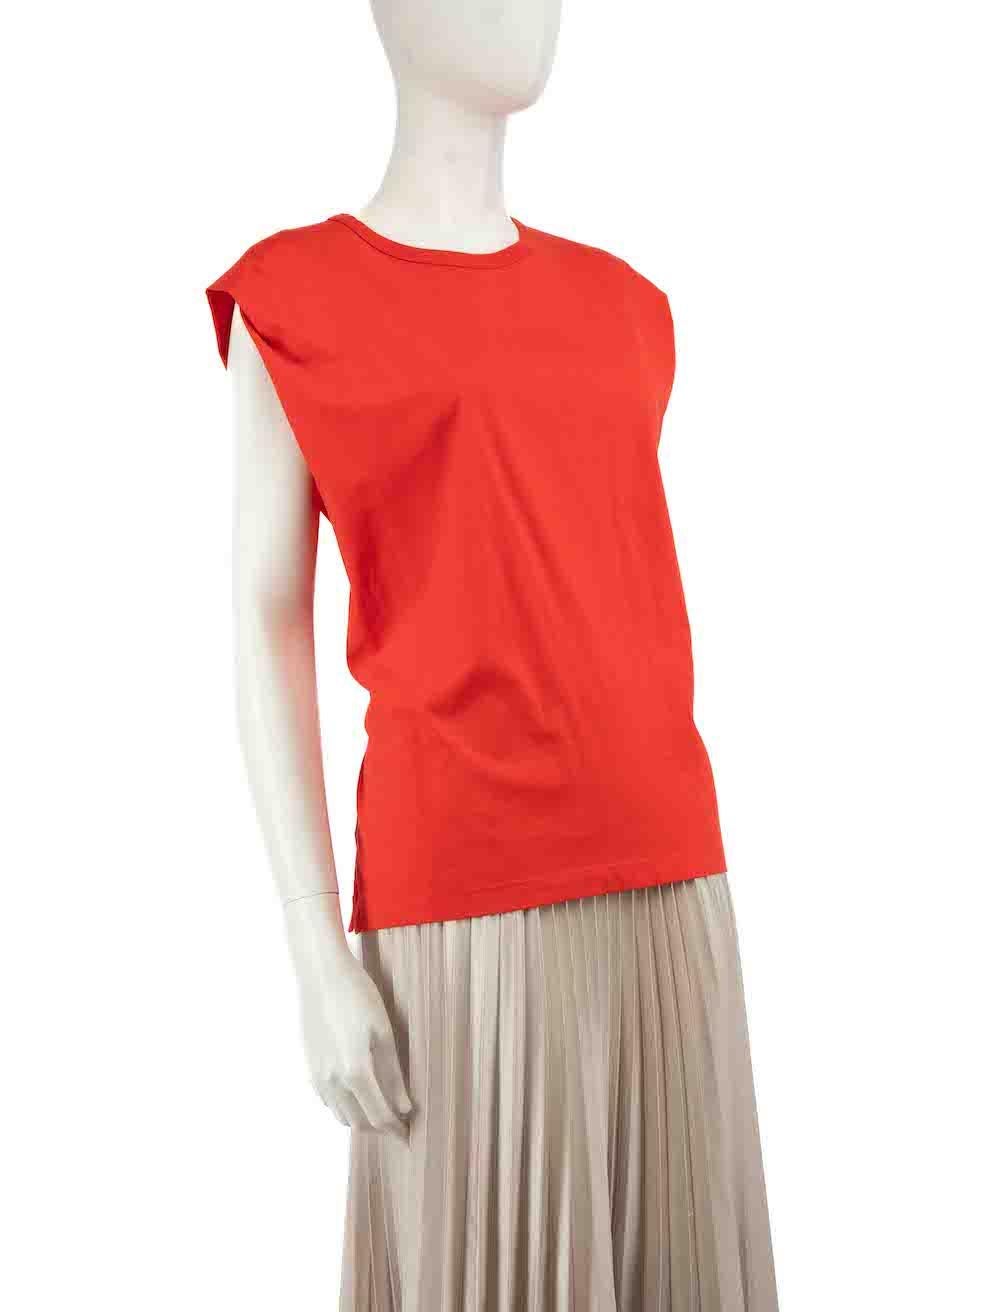 CONDITION is Very good. Minimal wear to top is evident. There are small marks to the fabric at the front of the t-shirt on this used Sandro designer resale item.
 
 Details
 Red
 Cotton
 Top
 Sleeveless
 Round neck
 Waist tie
 
 
 Made in Portugal
